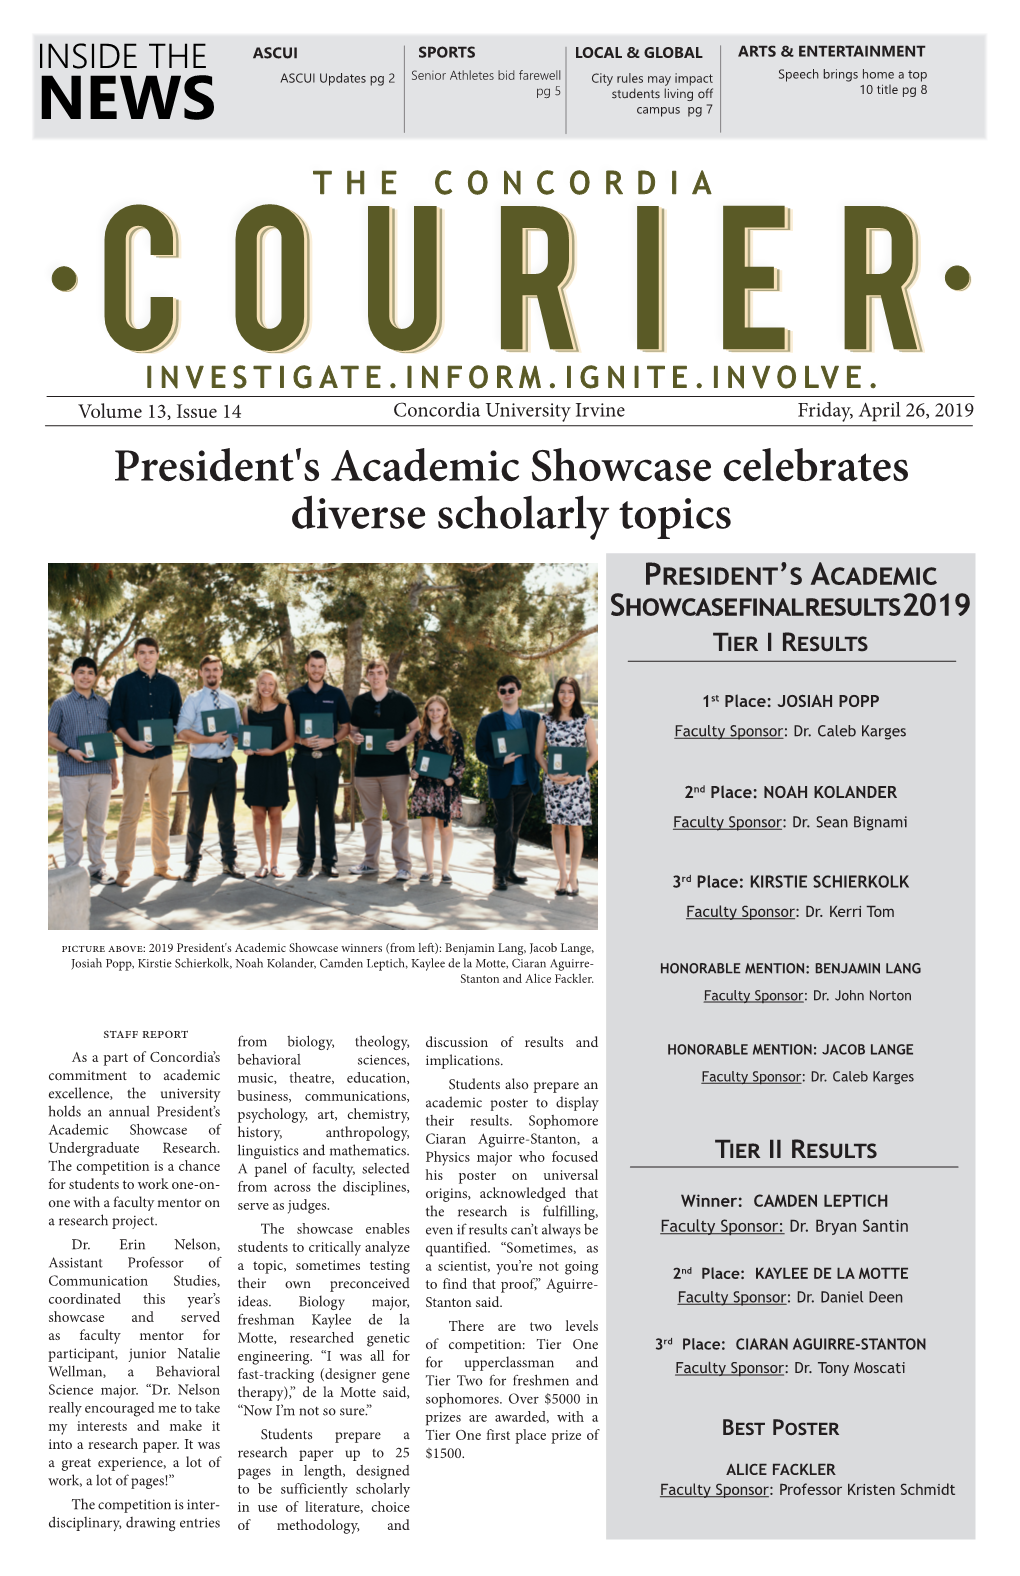 President's Academic Showcase Celebrates Diverse Scholarly Topics President’S Academic Showcase Final Results 2019 Tier I Results